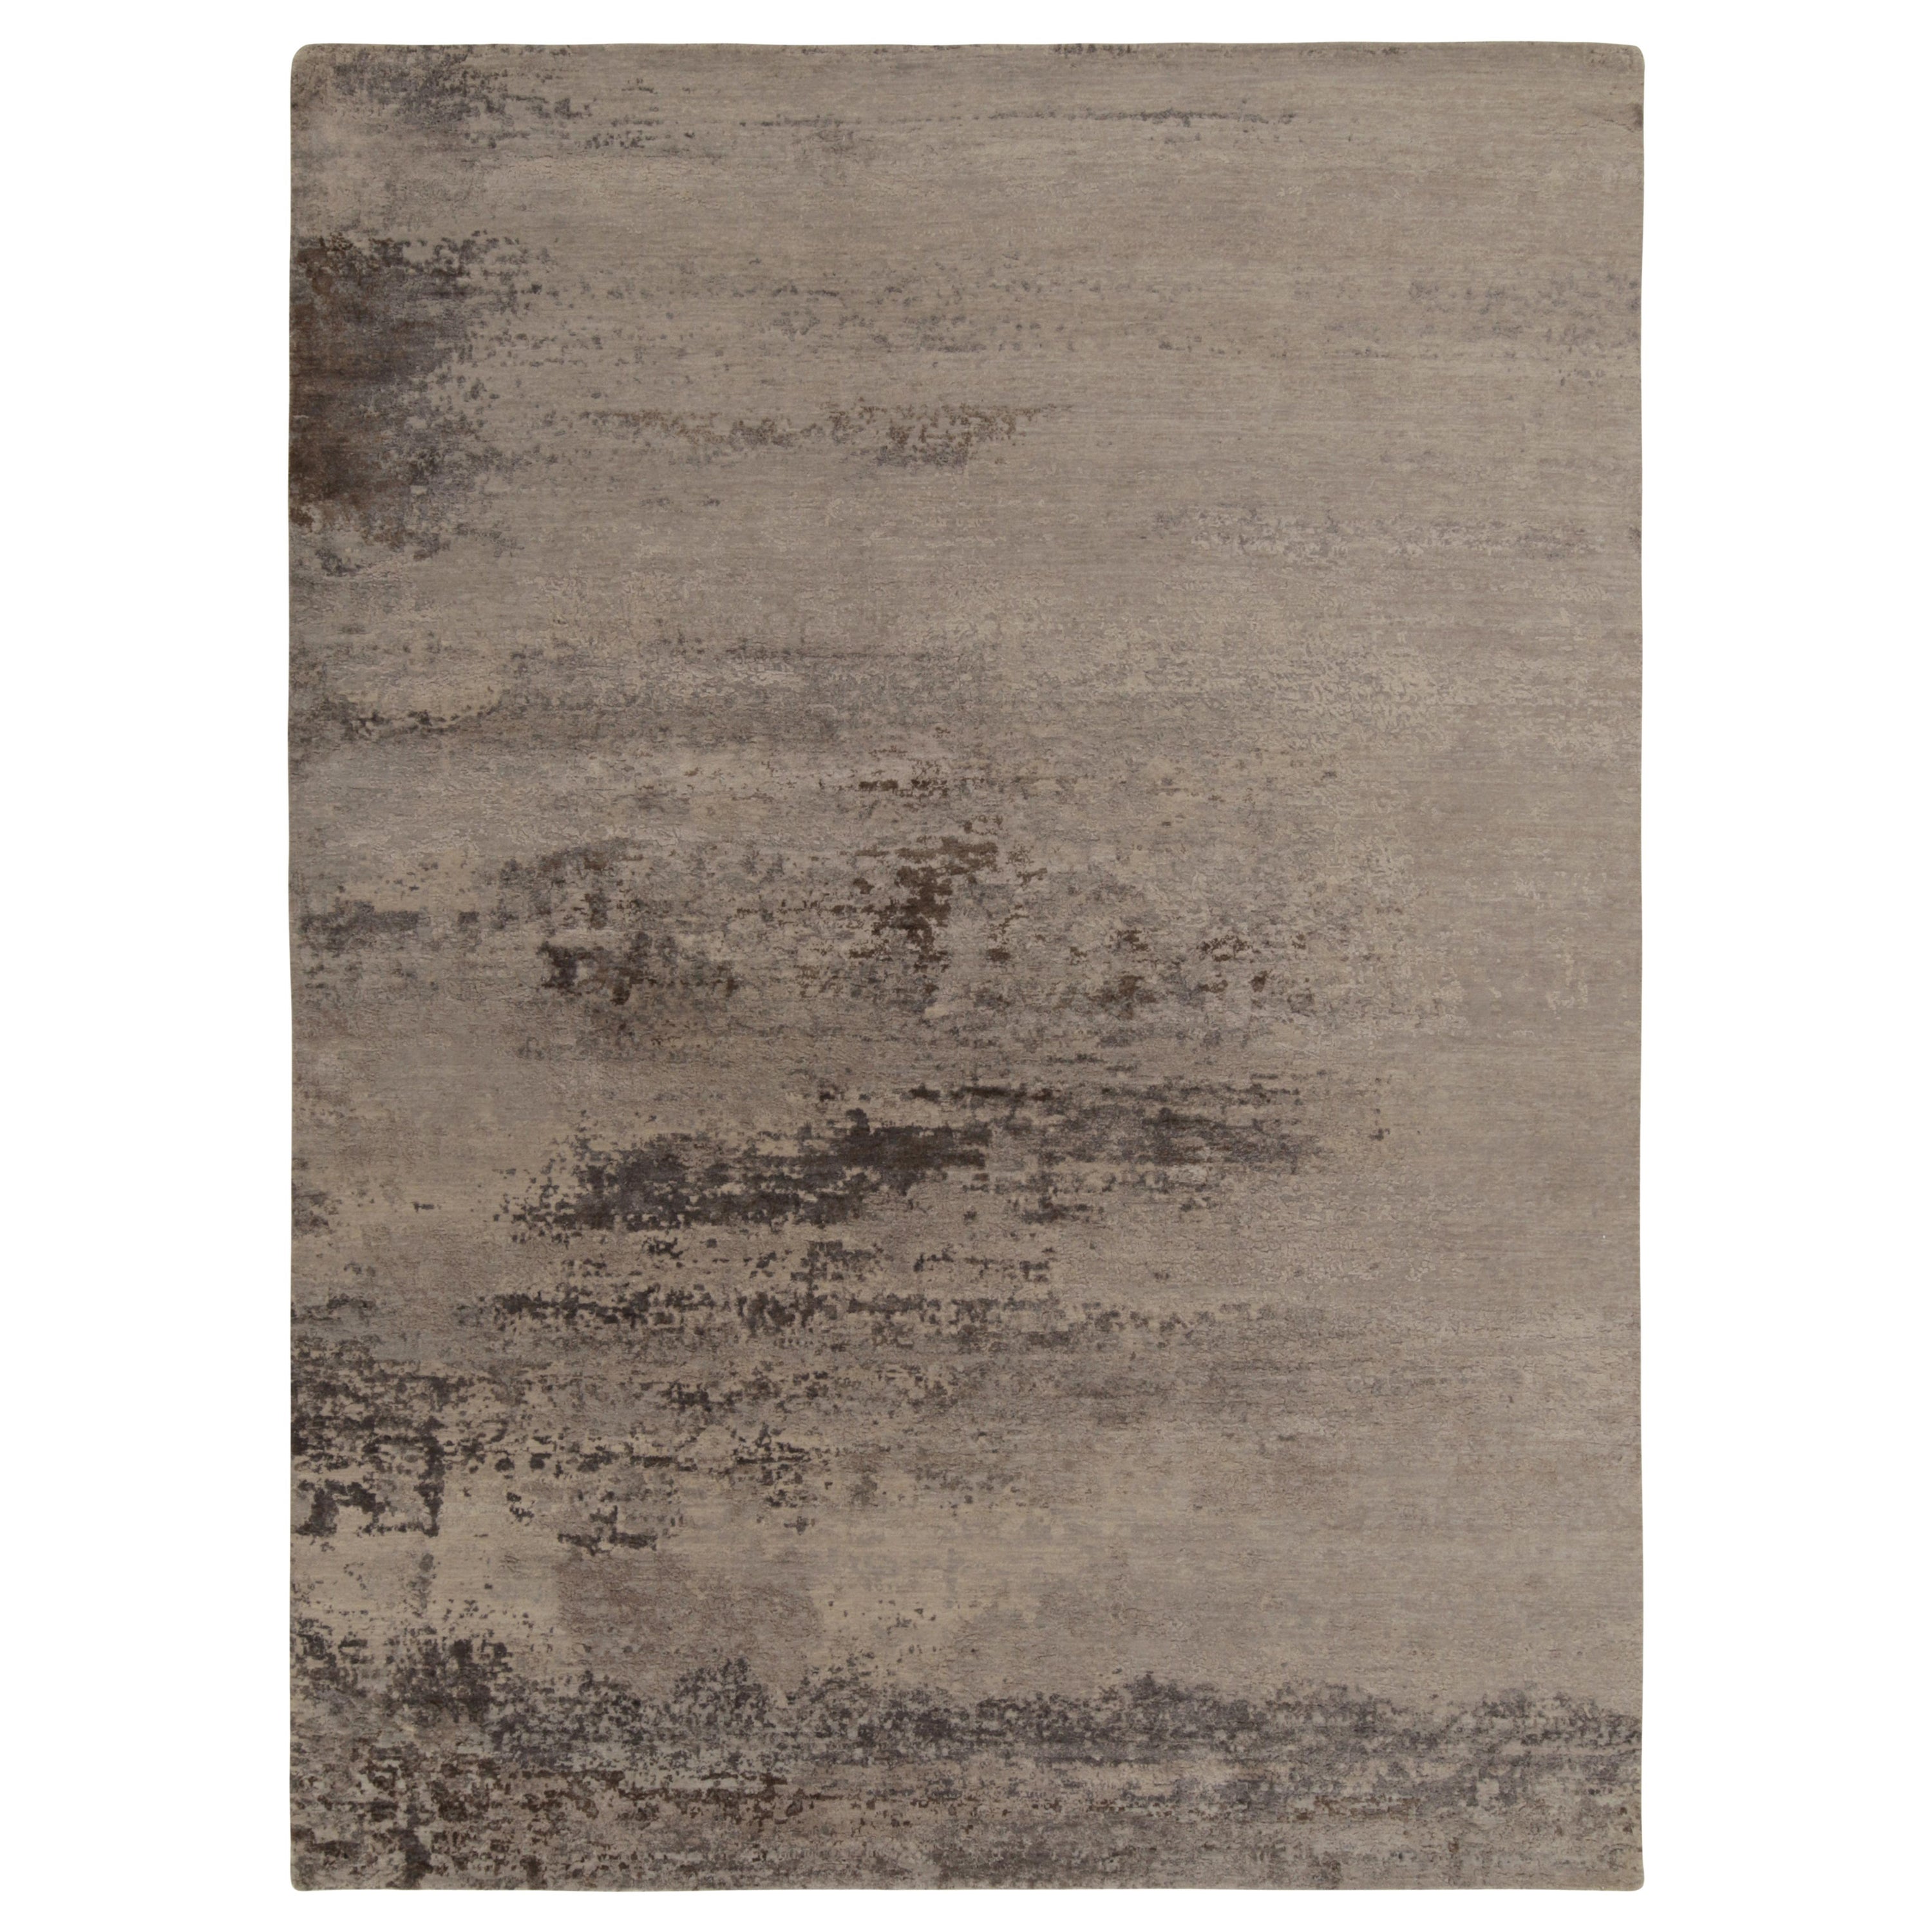 Rug & Kilim’s Abstract Rug in Silver-Grey, Beige-Brown Textural Pattern For Sale